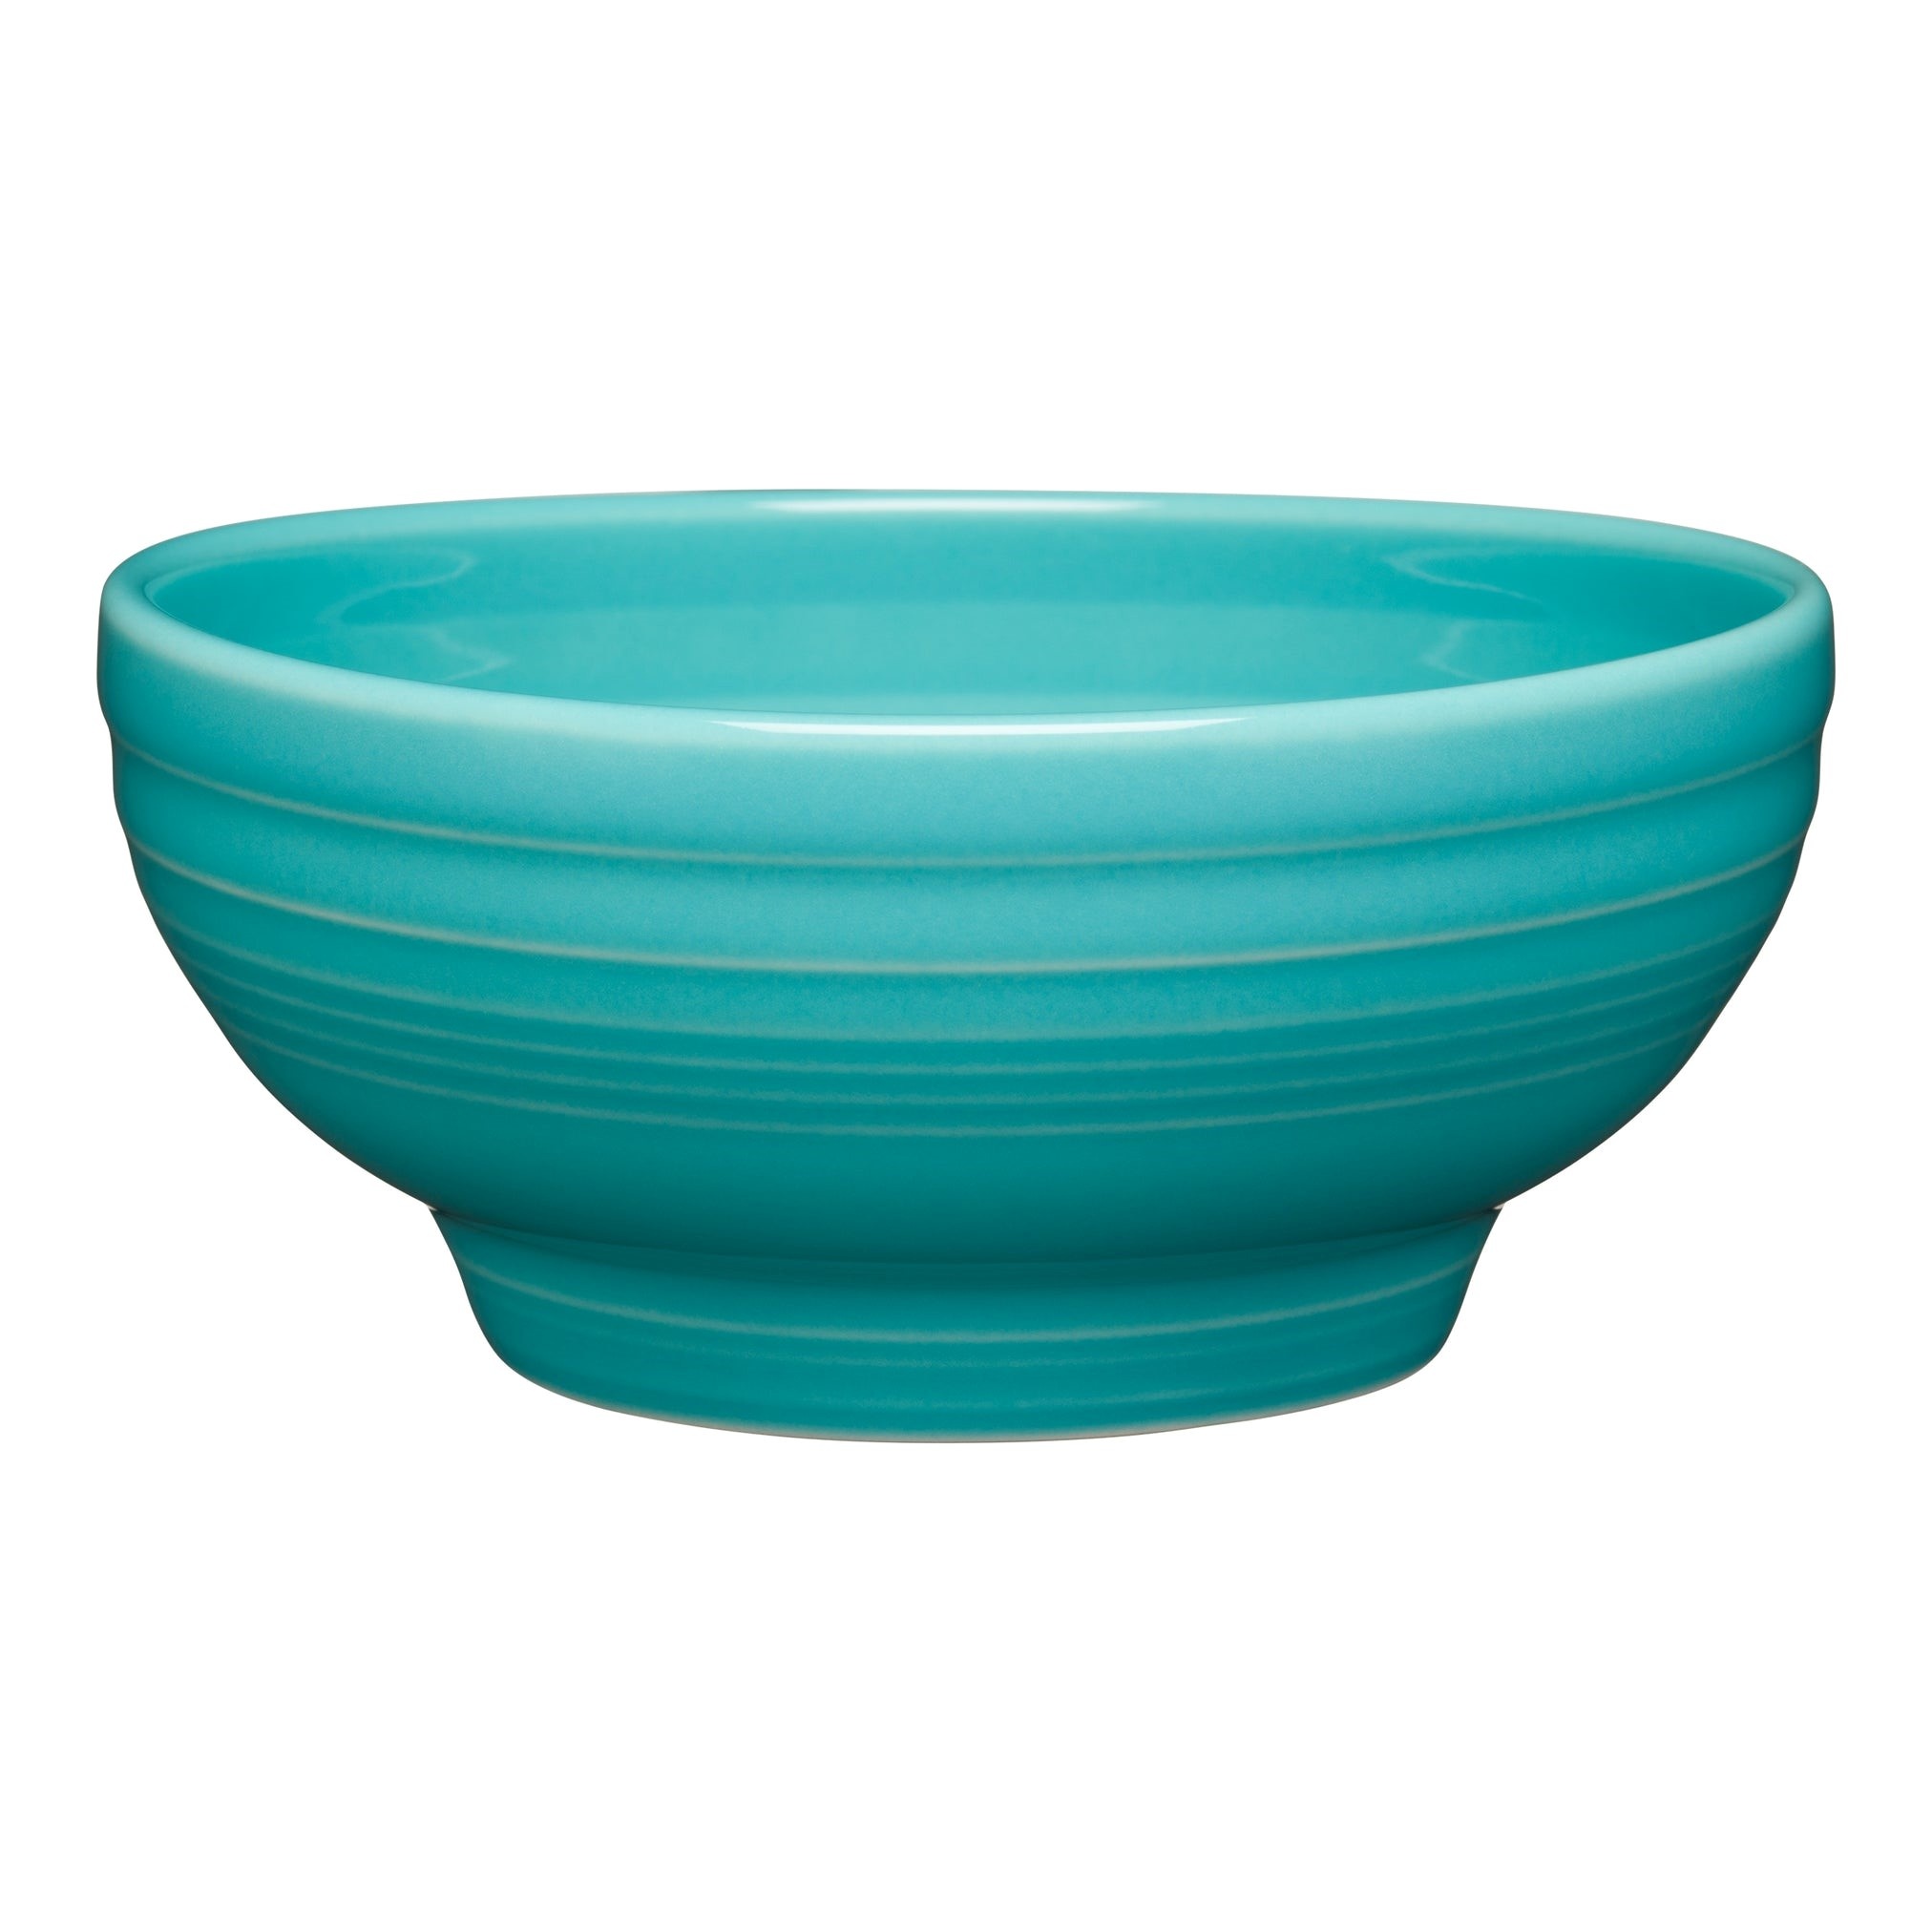 Fiesta Small Footed Bowl - Turquoise